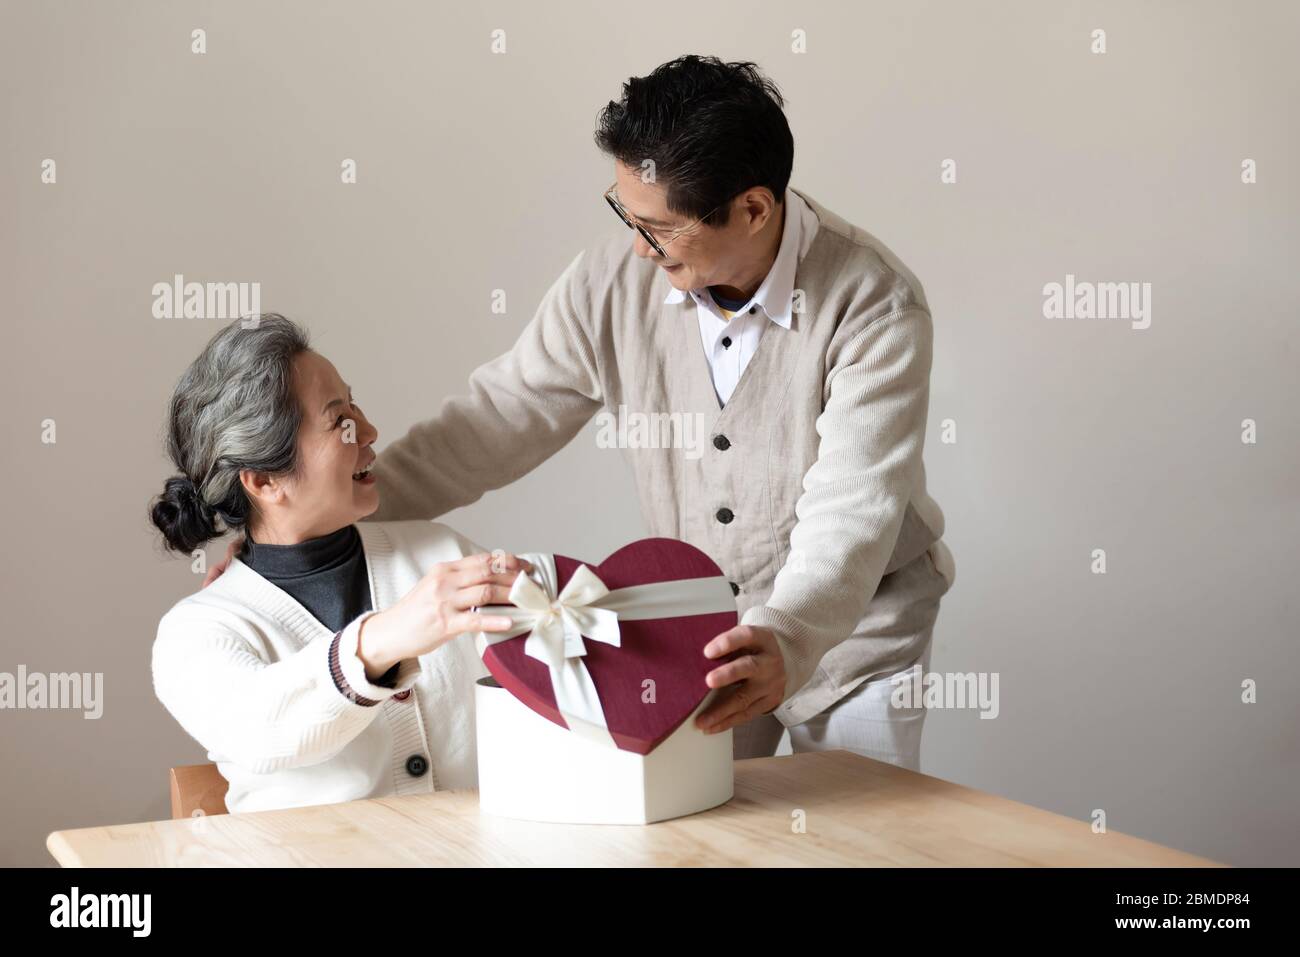 An Asian elderly couple sitting at the table Stock Photo